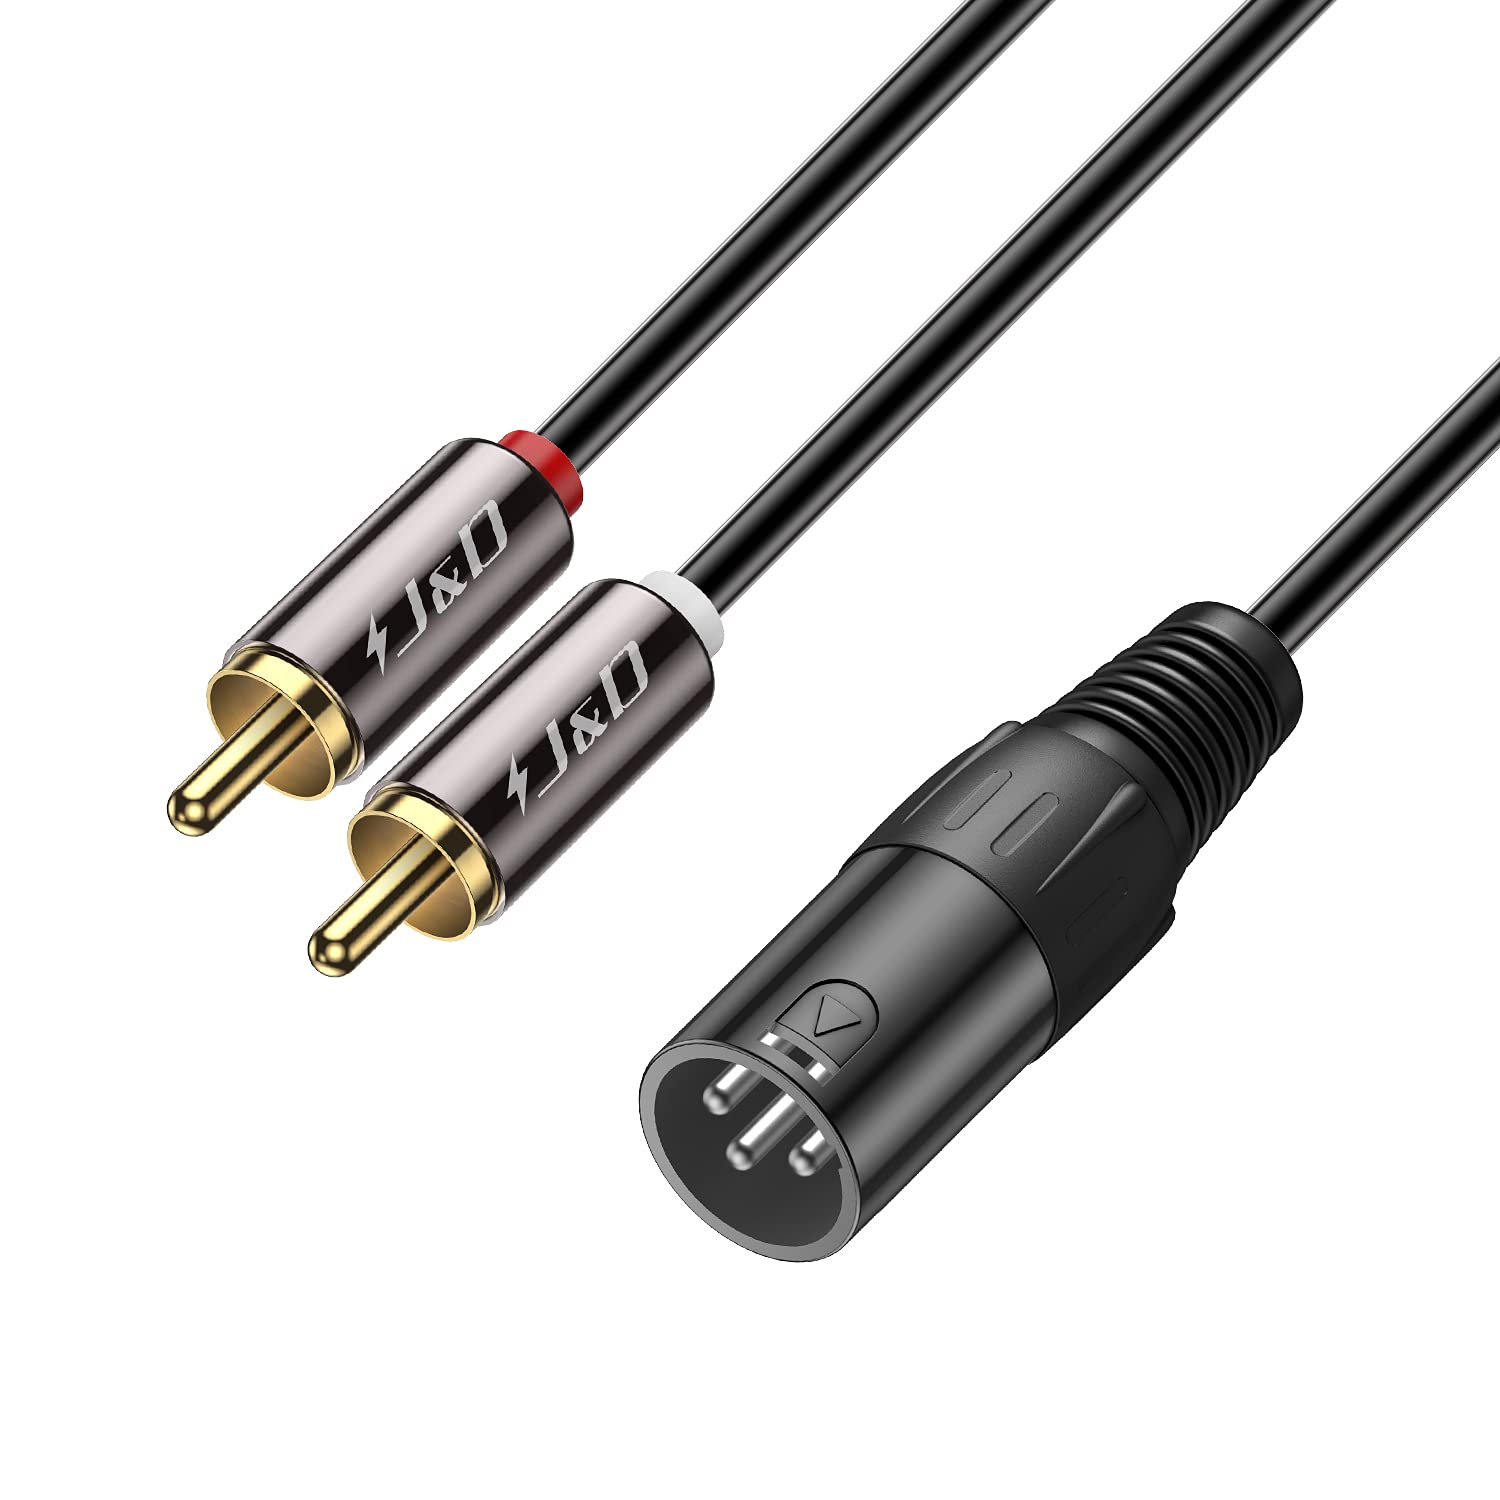 Benchmark XLRF to RCA Adapter Cable for Analog Audio - pin 3 floating -  Benchmark Media Systems